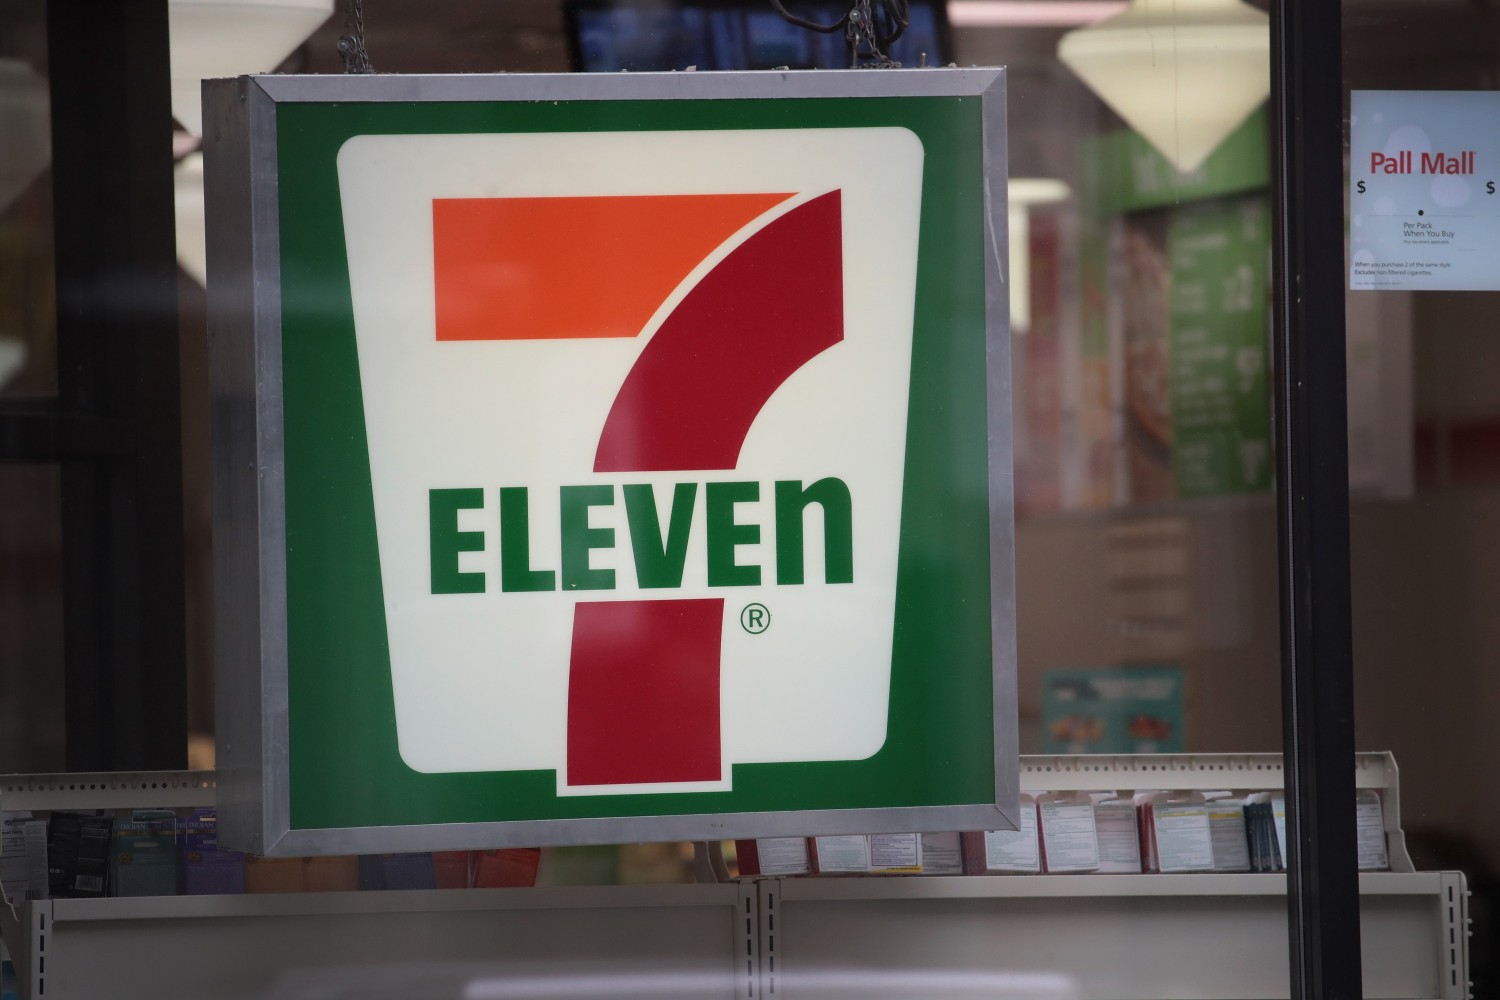 Agents From Immigration And Customs Enforcement Agency Target About 100 7-Eleven Stores In Employment Of Undocumented Raids